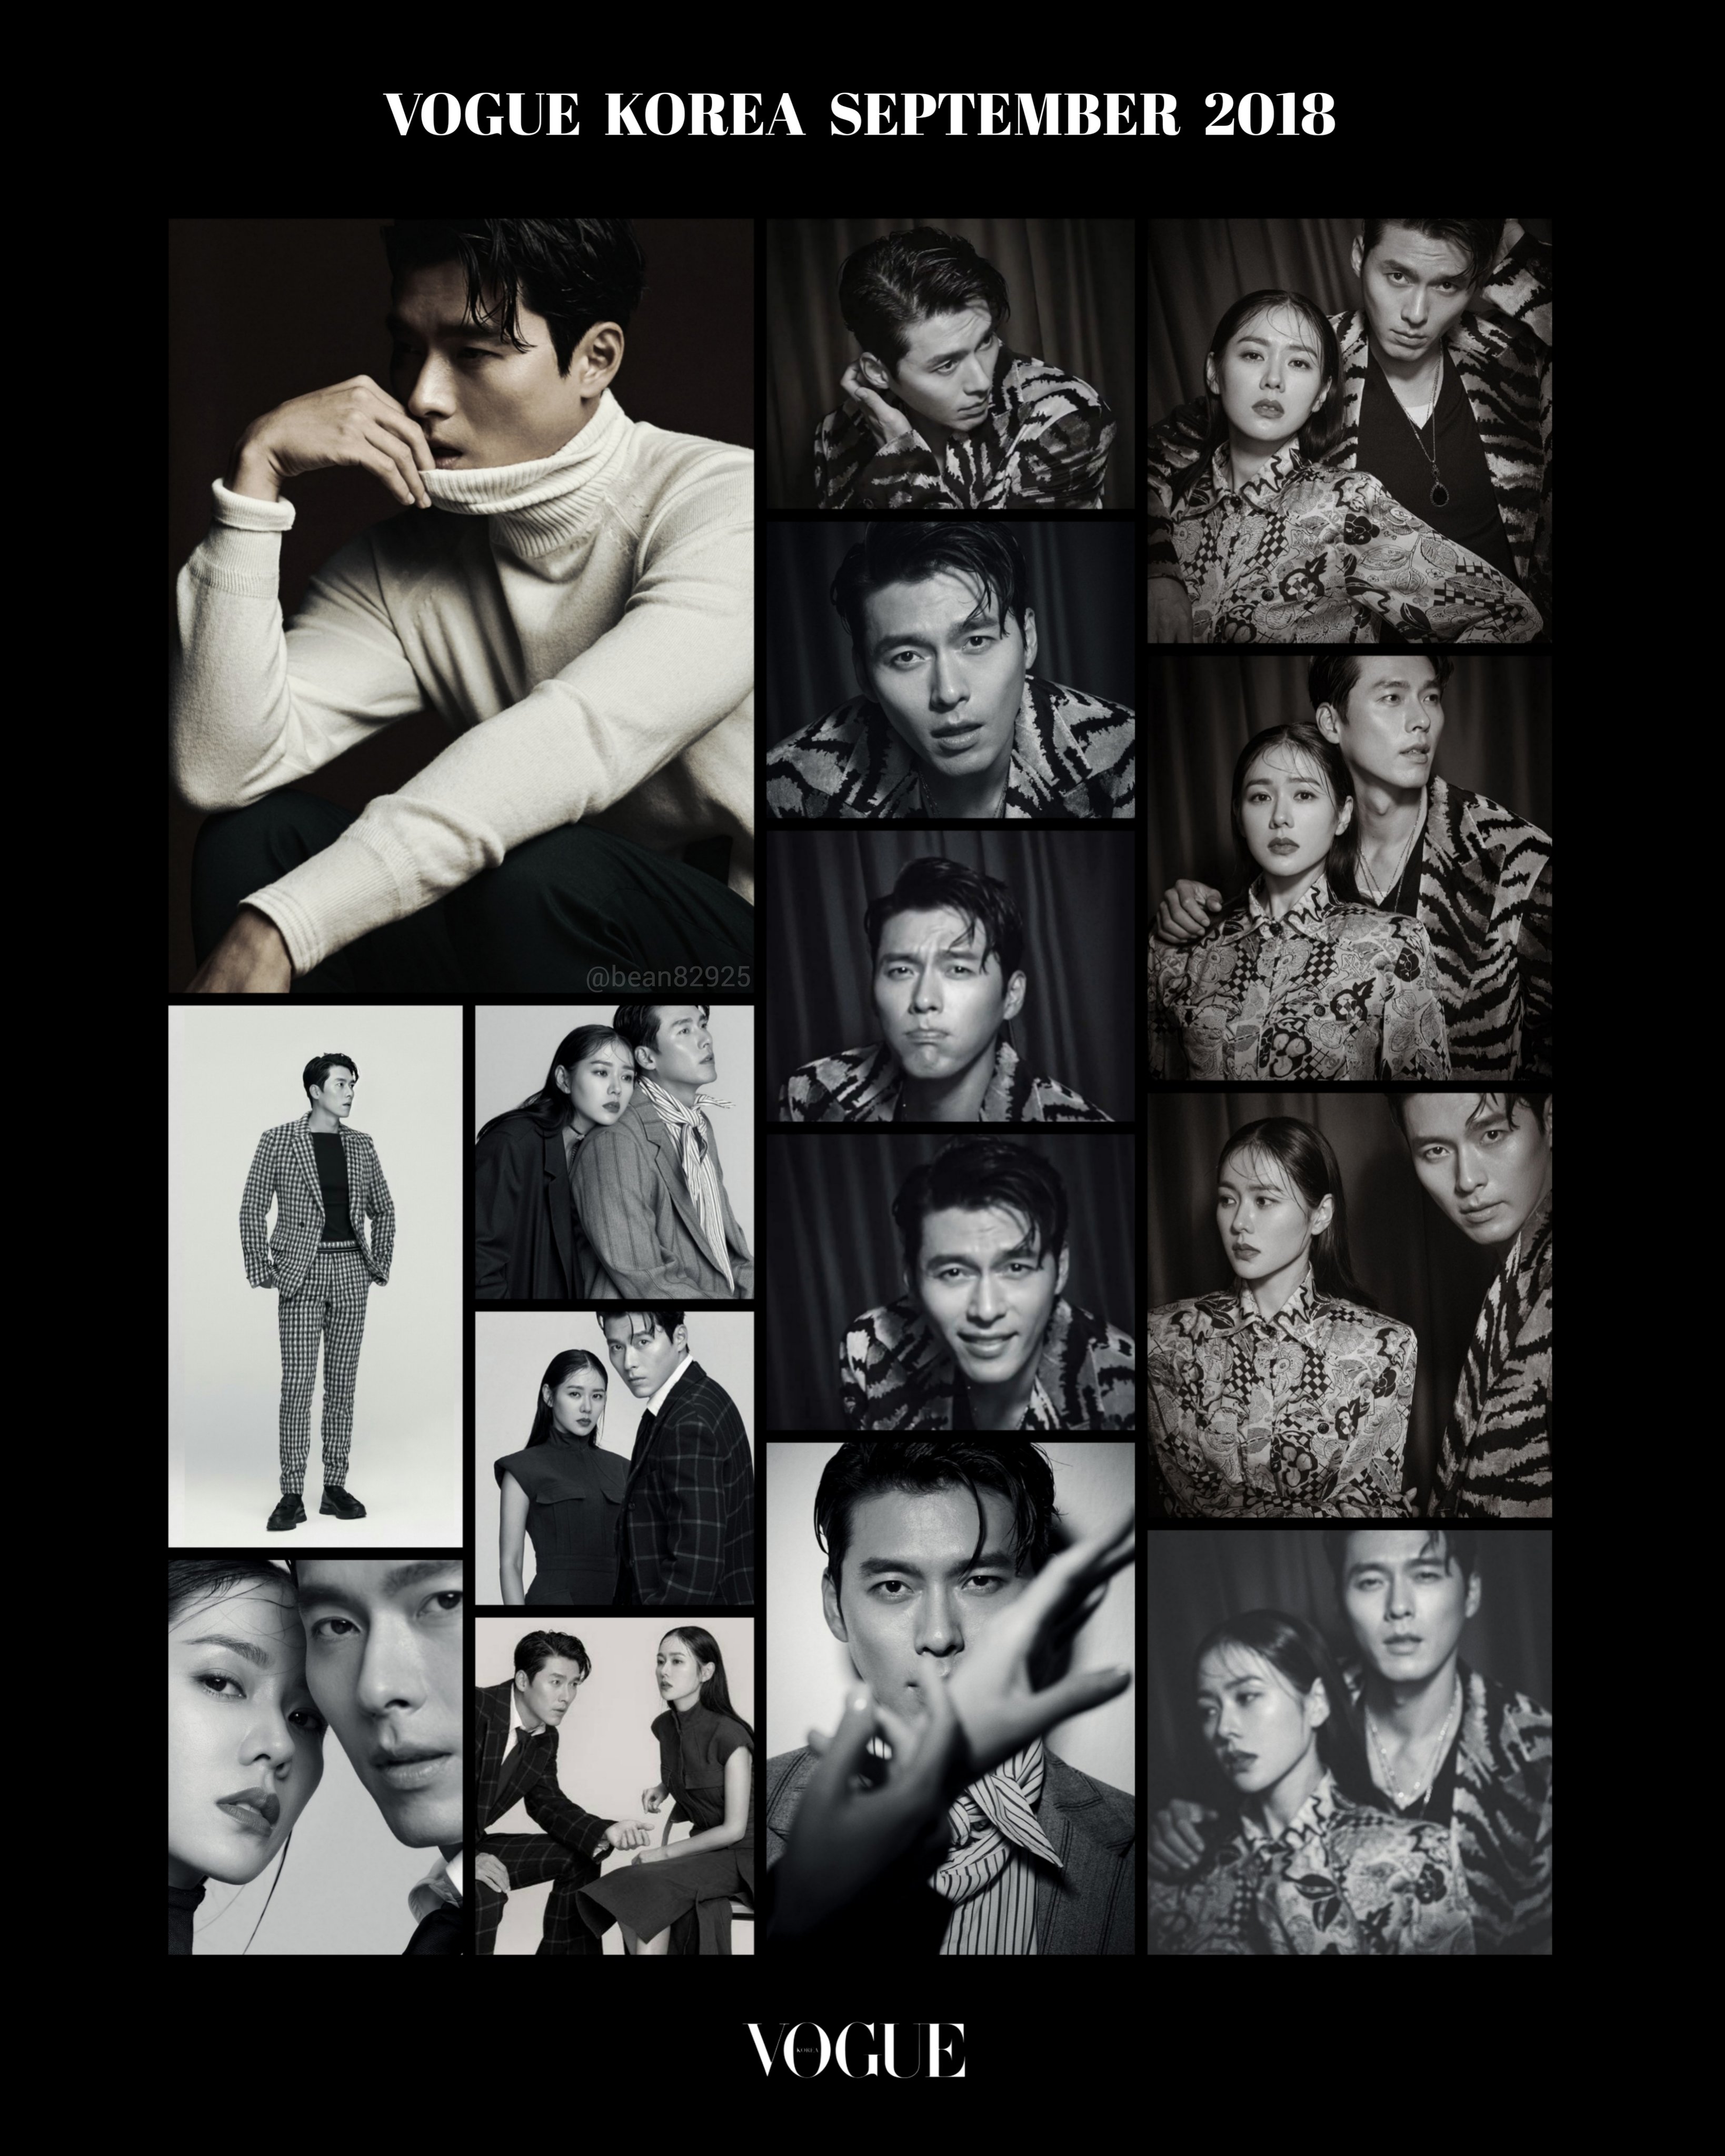 Confirmed Couple Est 18 D1 Last Pic Of Hyun Bin I Saved T Co Ouk2asqz3n Twitter